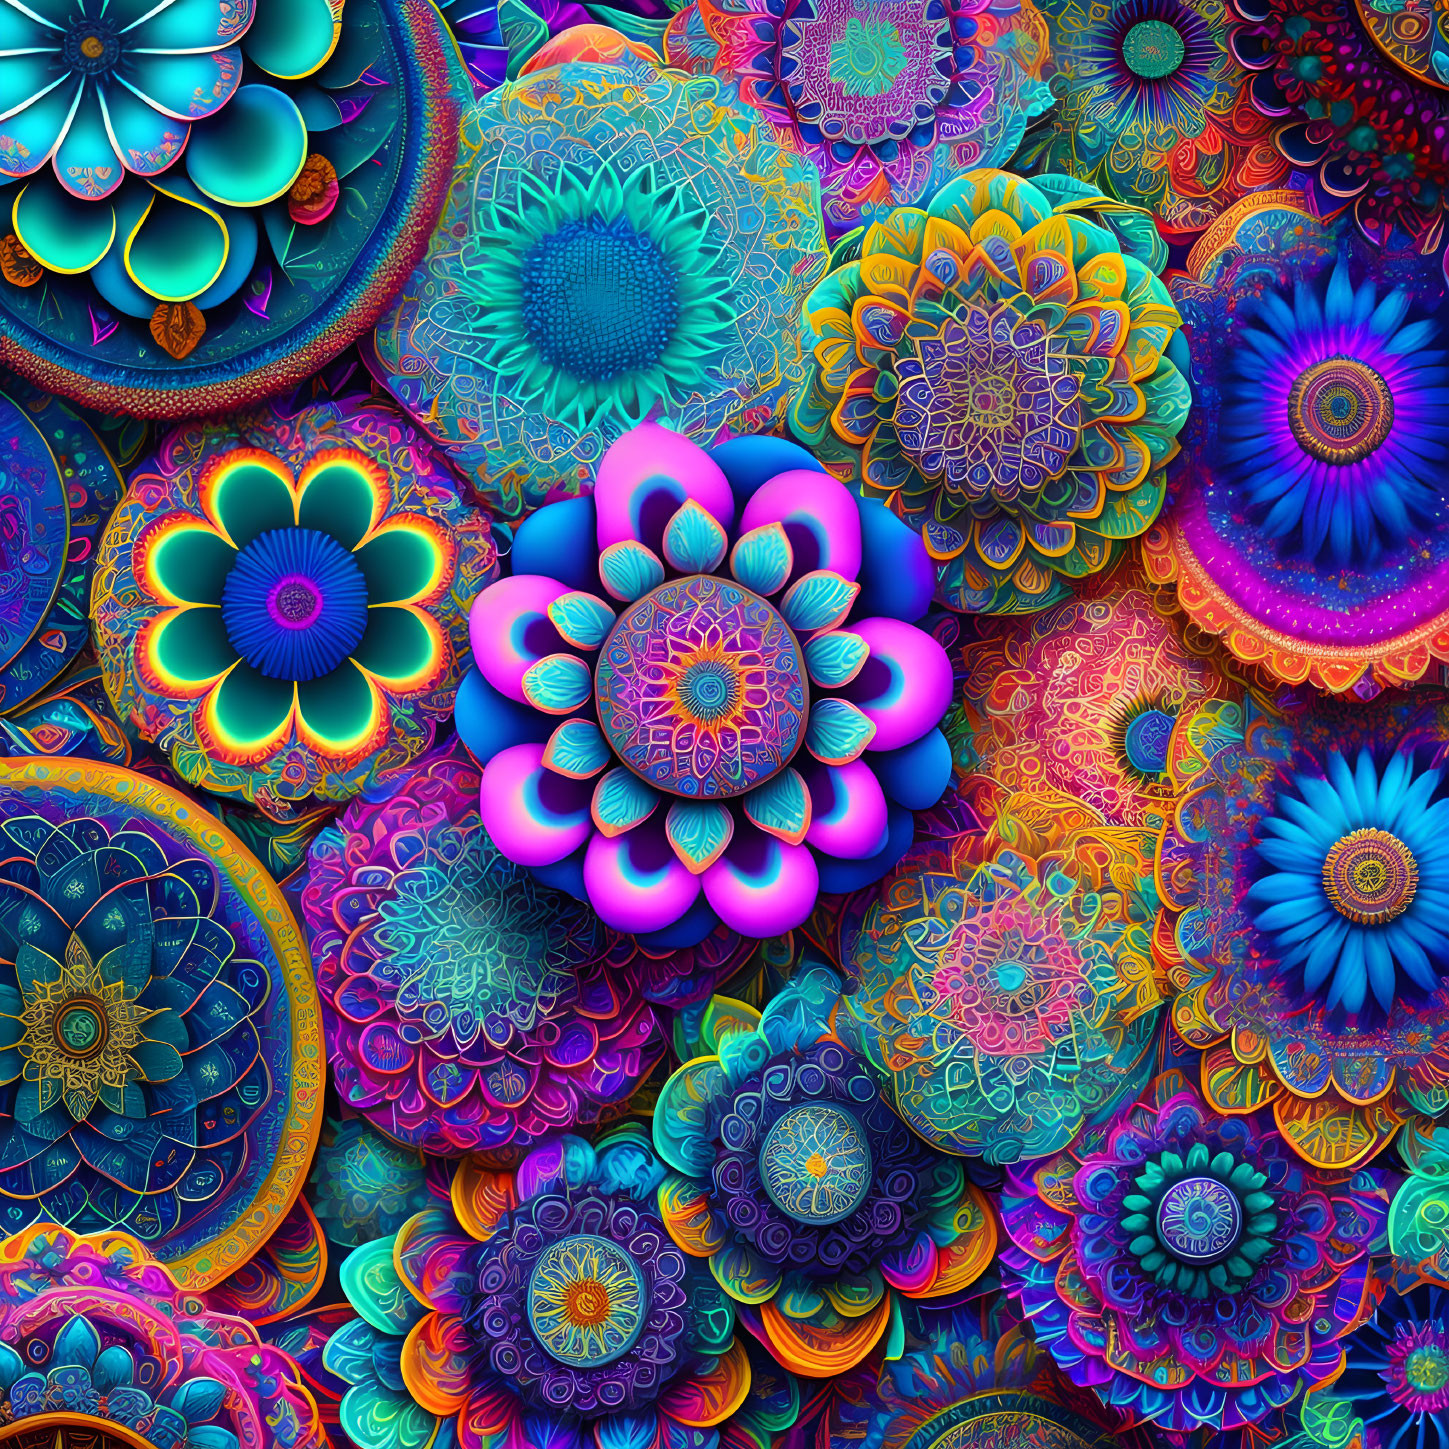 Colorful Mandala Patterns in Blues, Purples, and Oranges